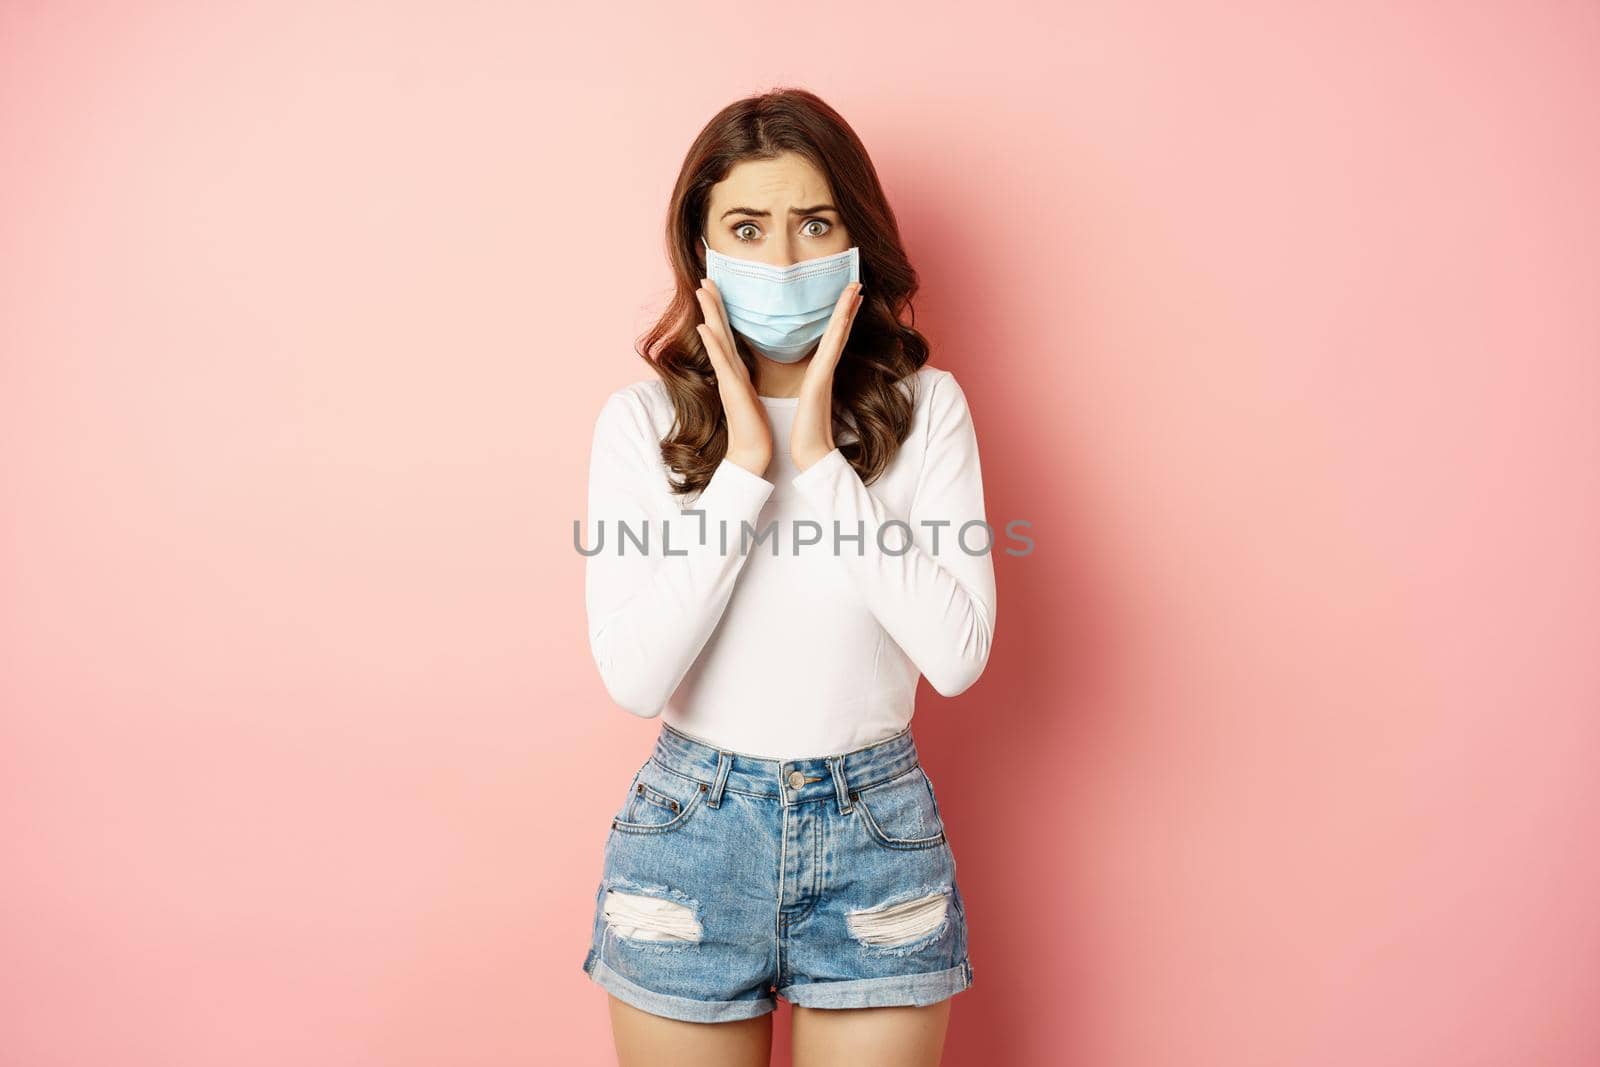 Covid-19 and quarantine concept. Stylish girl in medical face mask, looking worried and shocked at camera, standing against pink background.